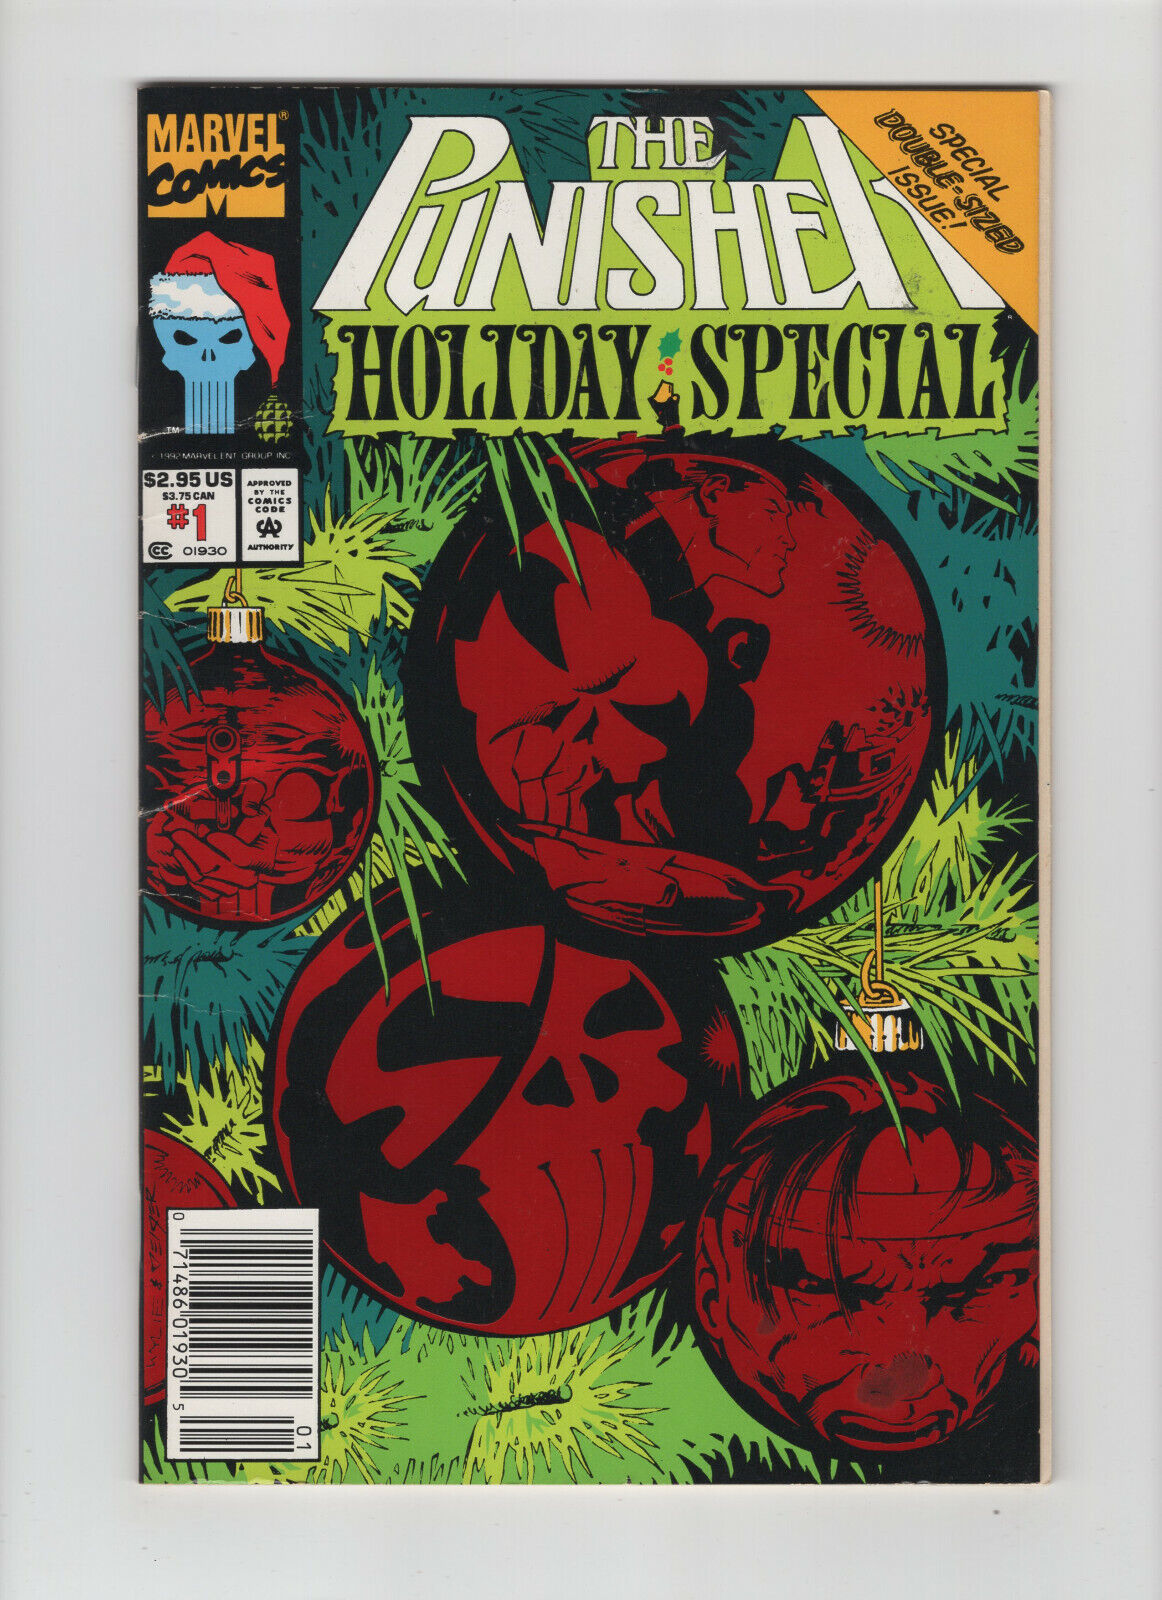 The Punisher: Holiday Special #1 (Marvel Comic, 1993)